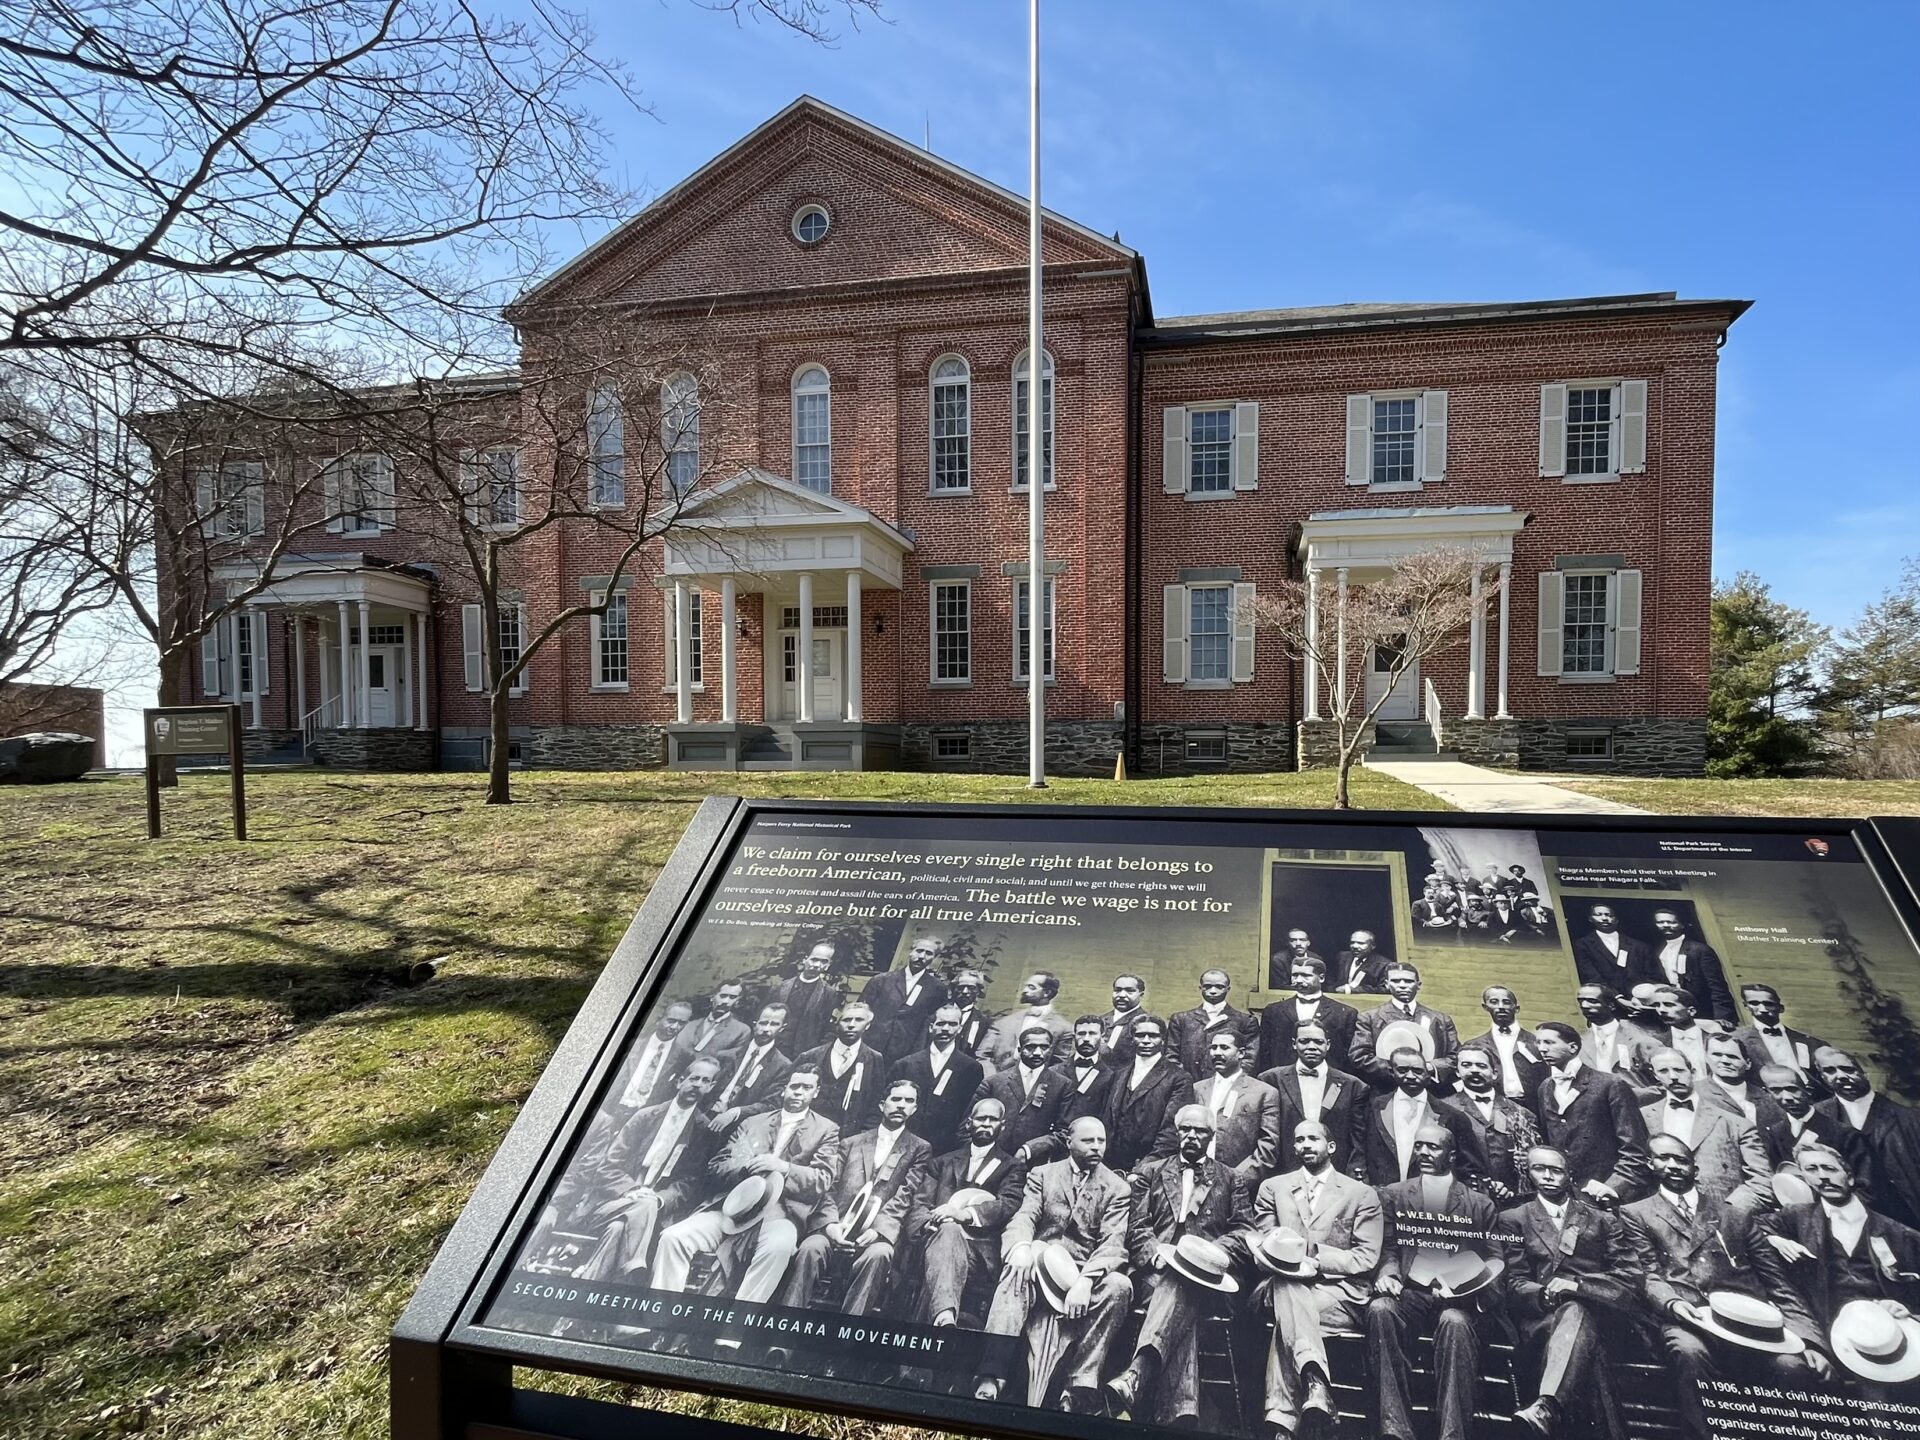 Harpers Ferry’s Ties To Civil Rights Movement Showcased In New Documentary